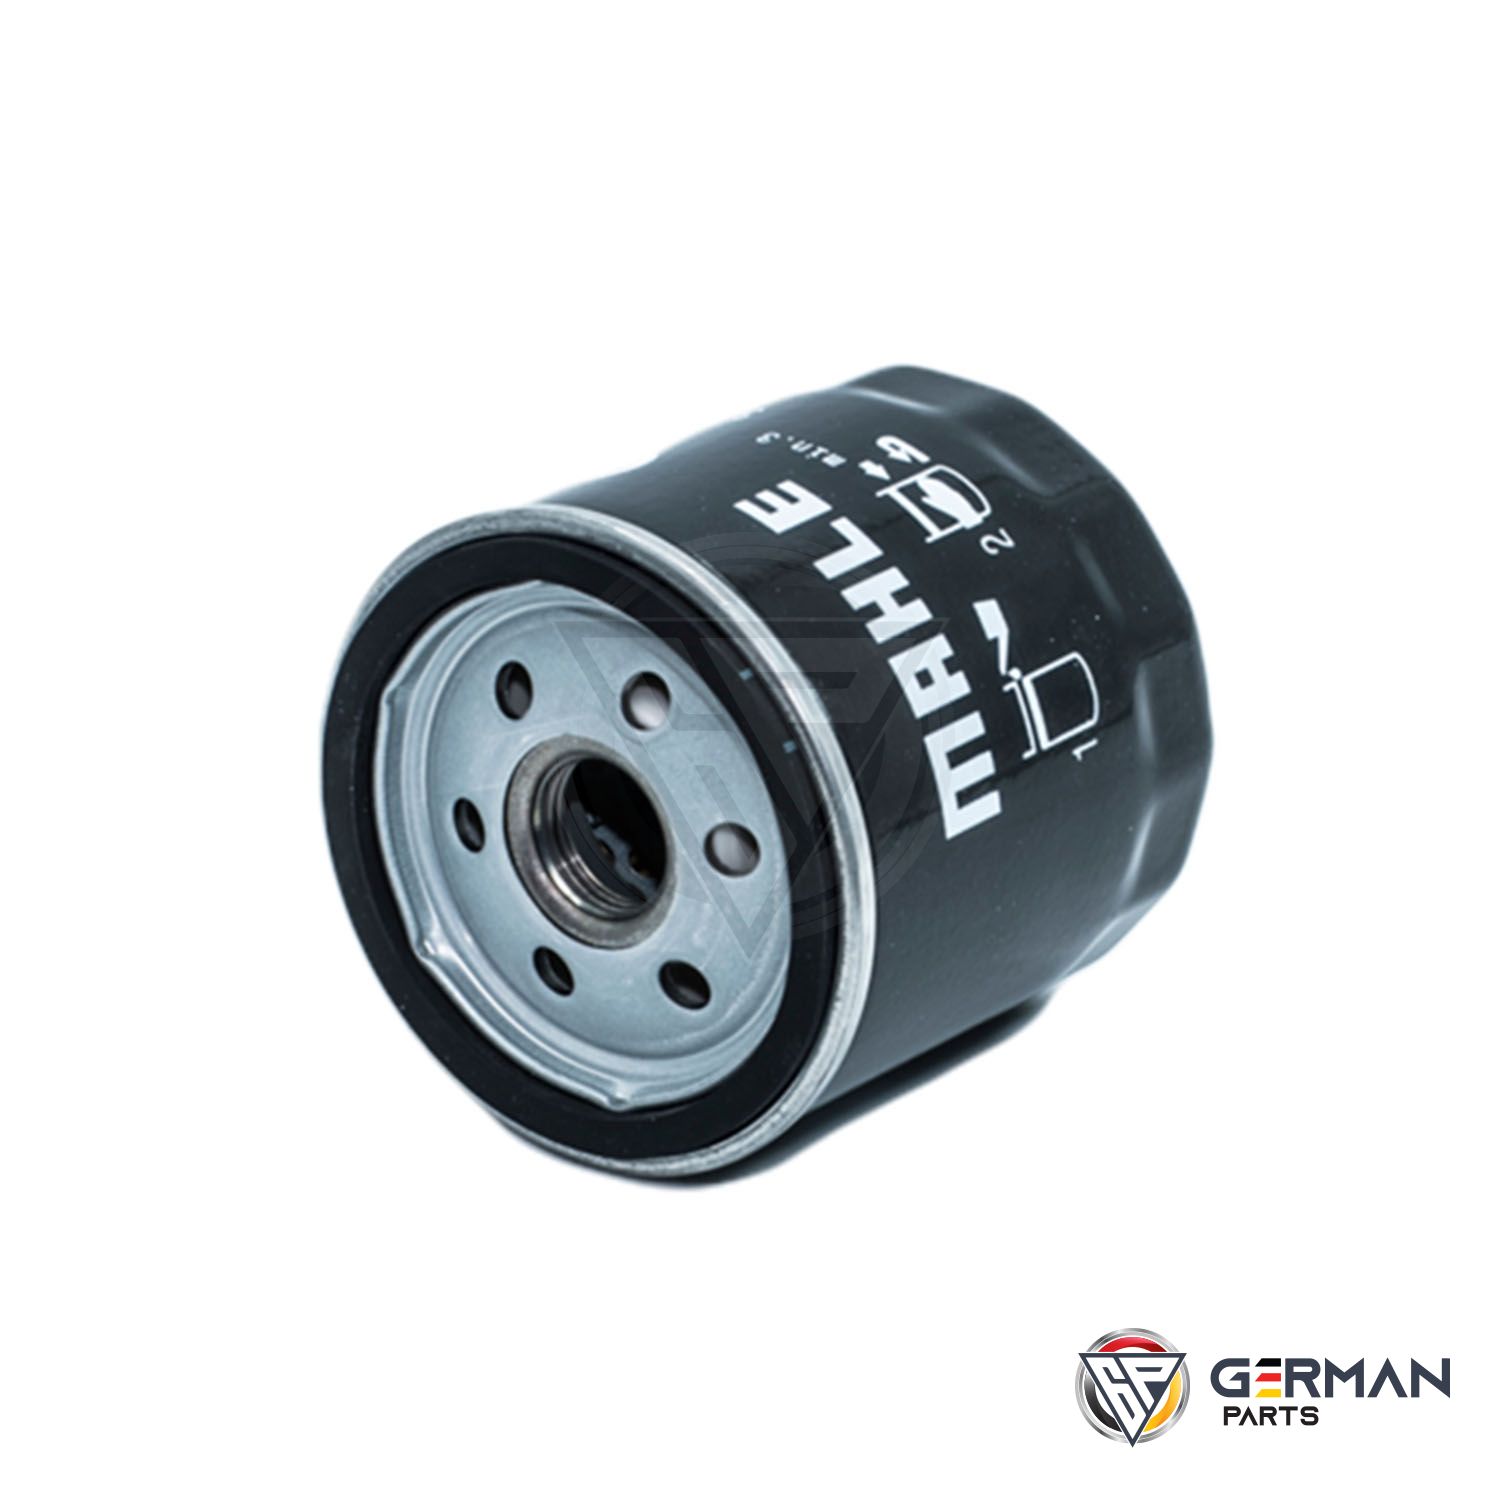 Buy Mahle Oil Filter 04E115561H - German Parts